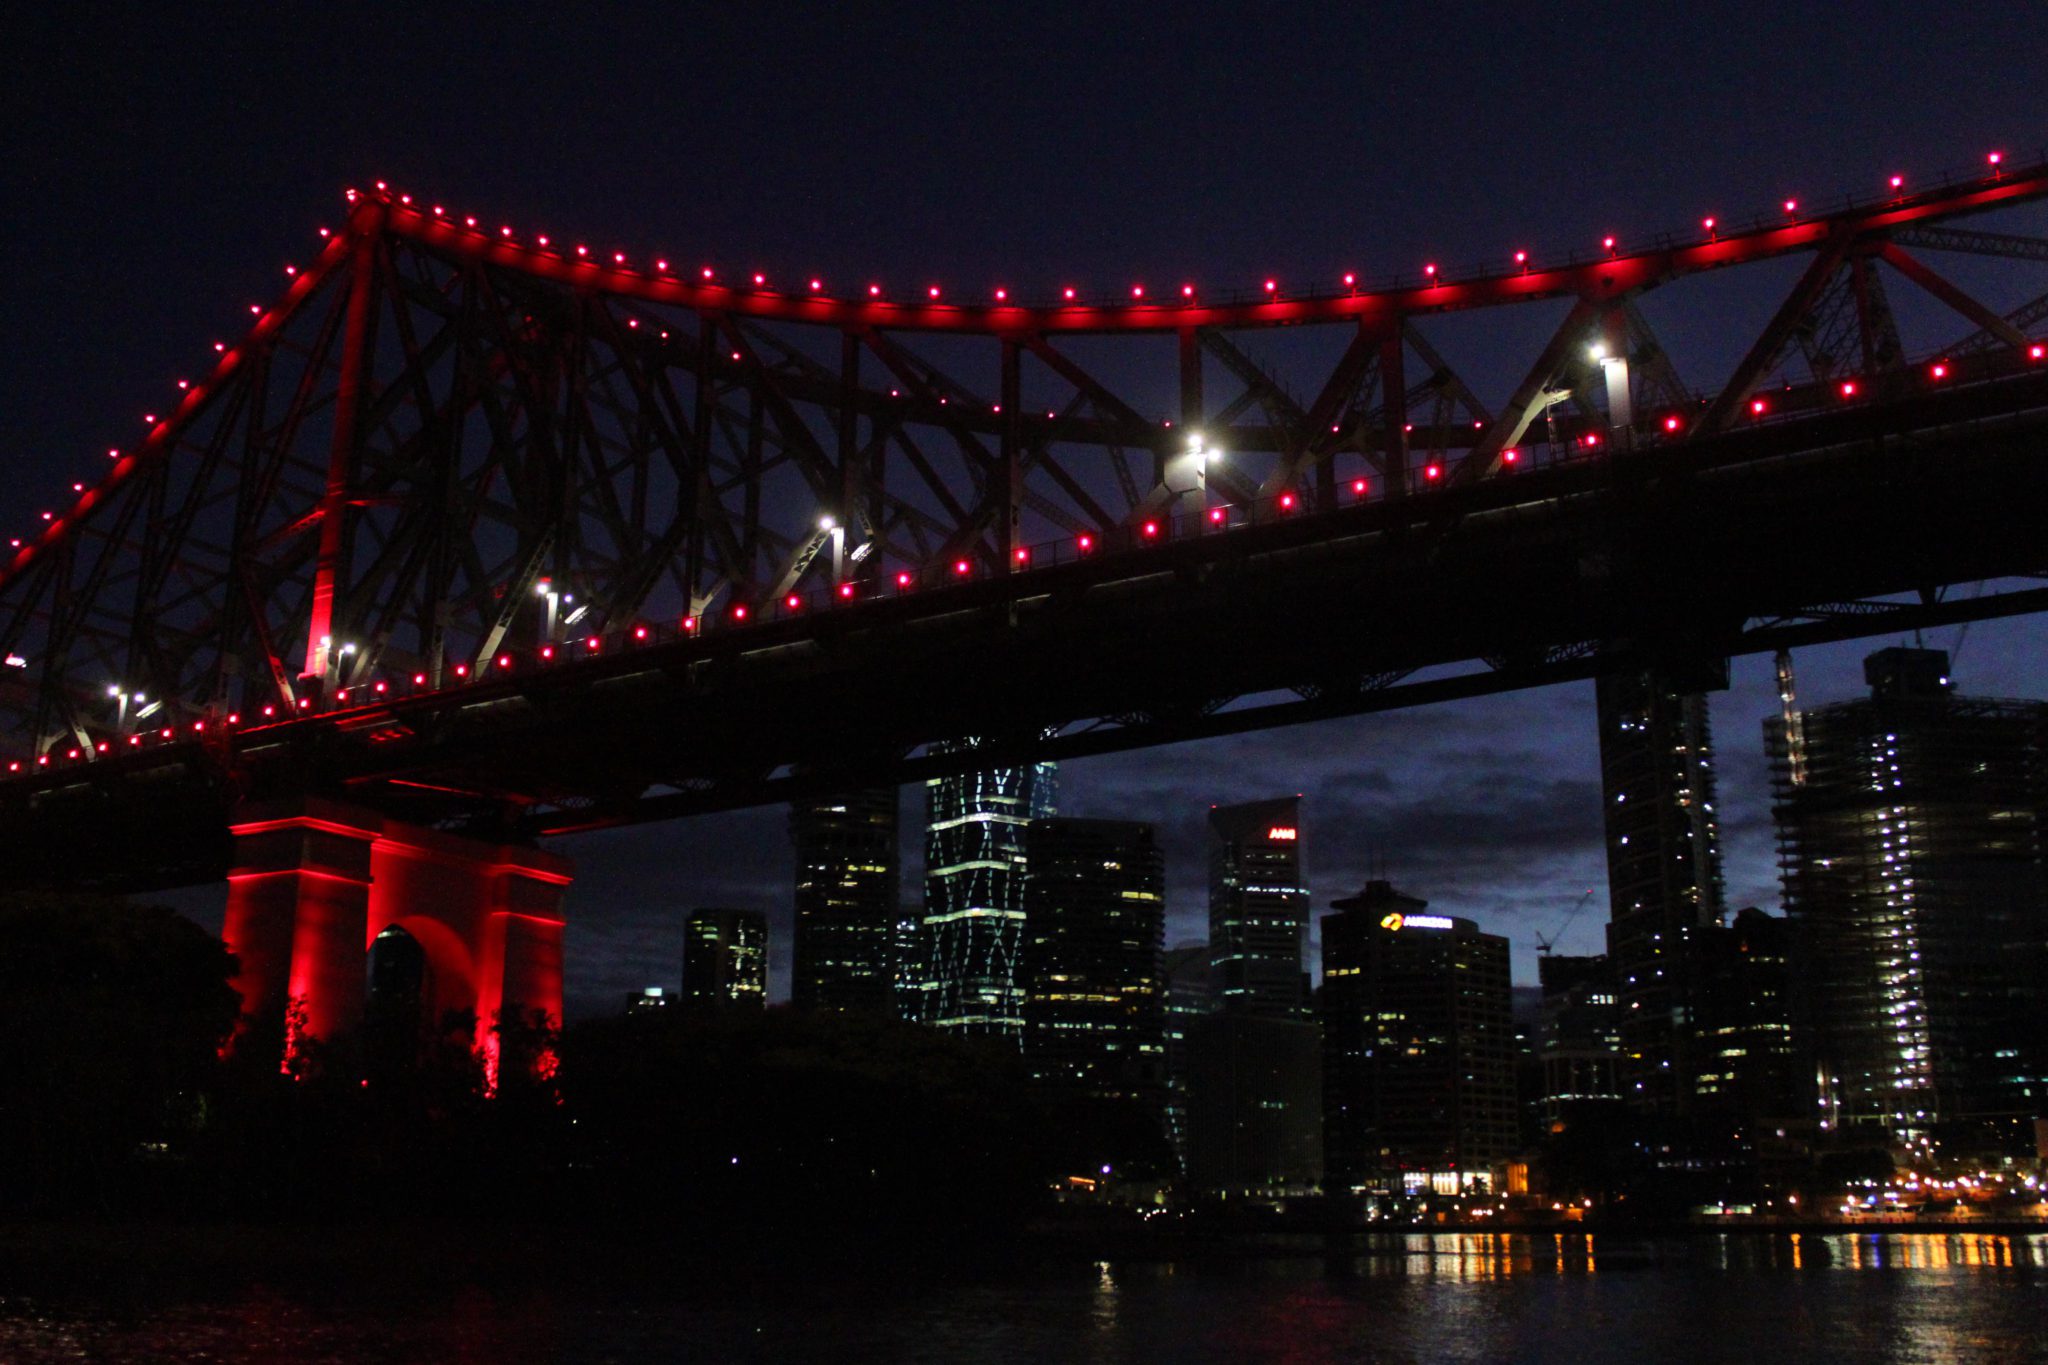 Take a night ferry ride through Brisbane Australia | 5 must see locations from the Gold Coast of Australia to the Sunshine Coast #australia #brisbane #simplywander